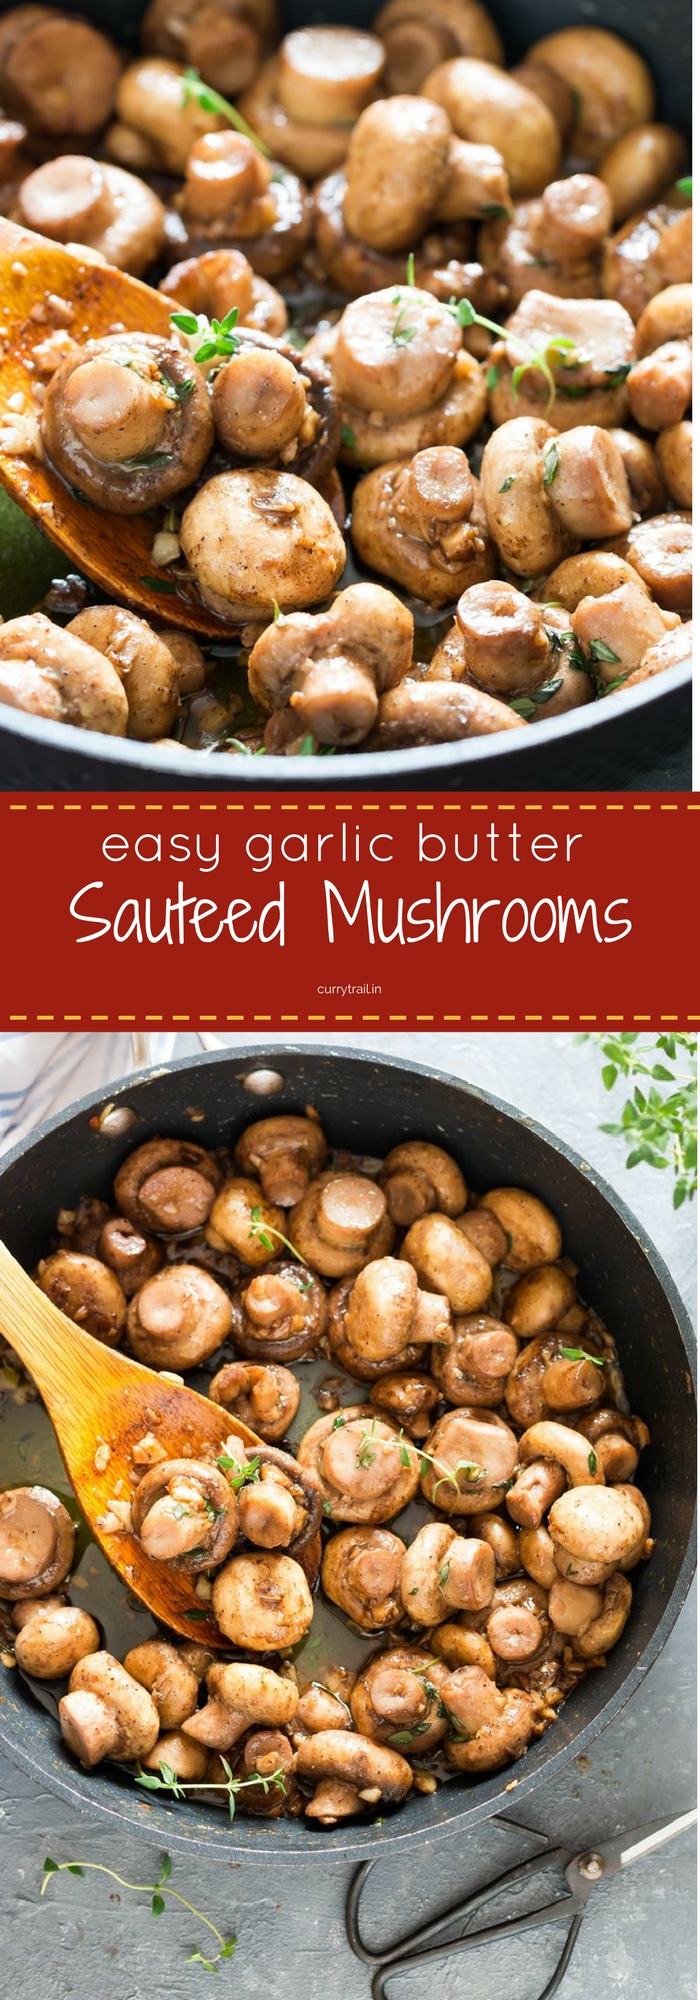 cooking sauteed mushroom recipe with butter garlic and thyme in skillet with text overlay